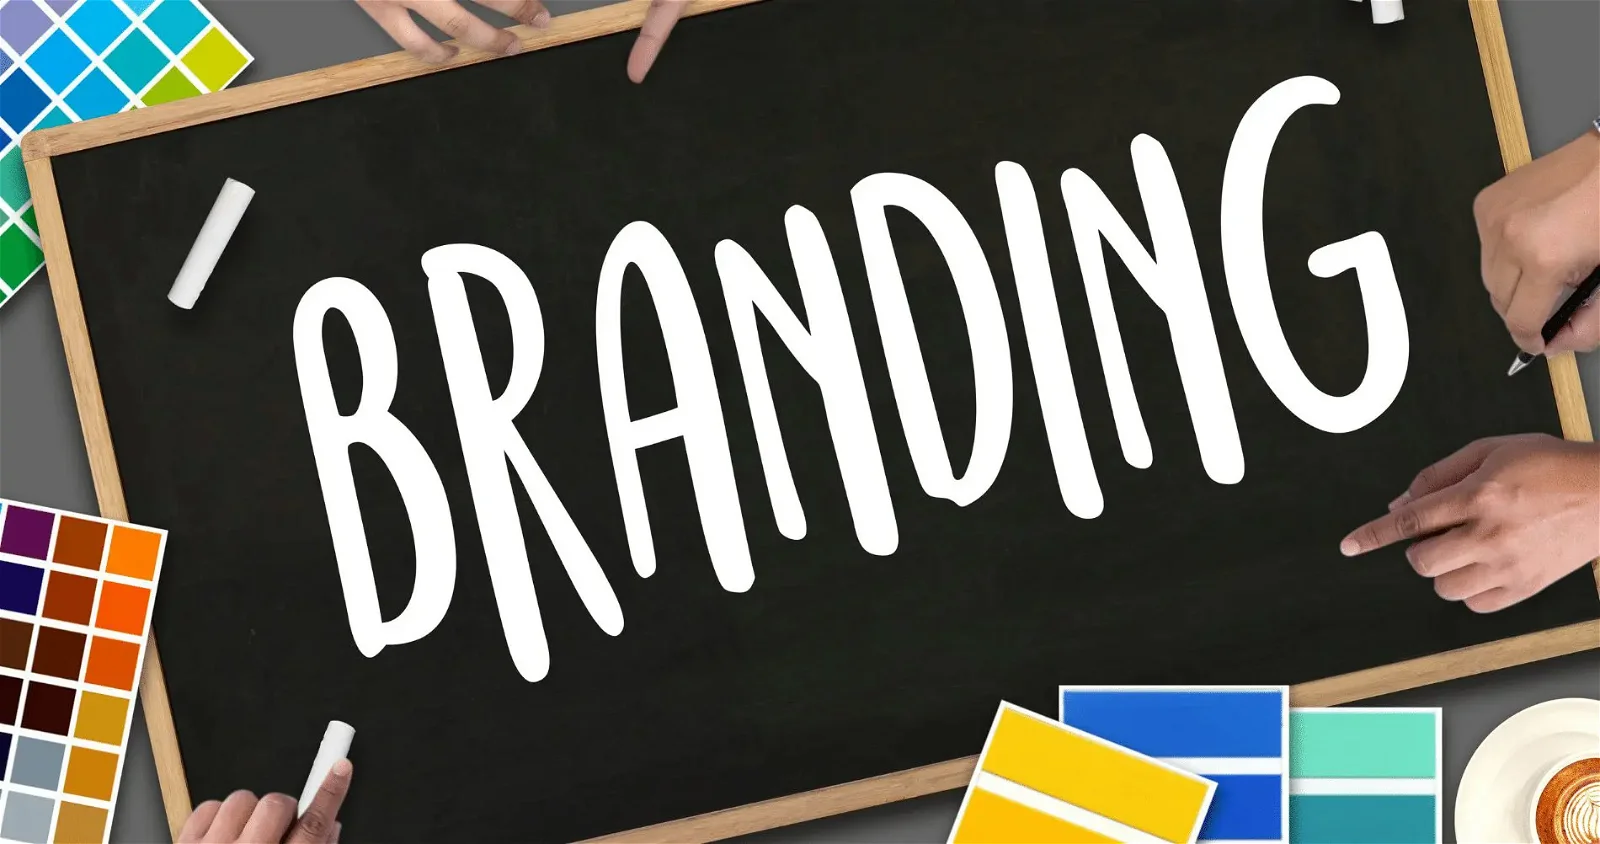 The importance of branding